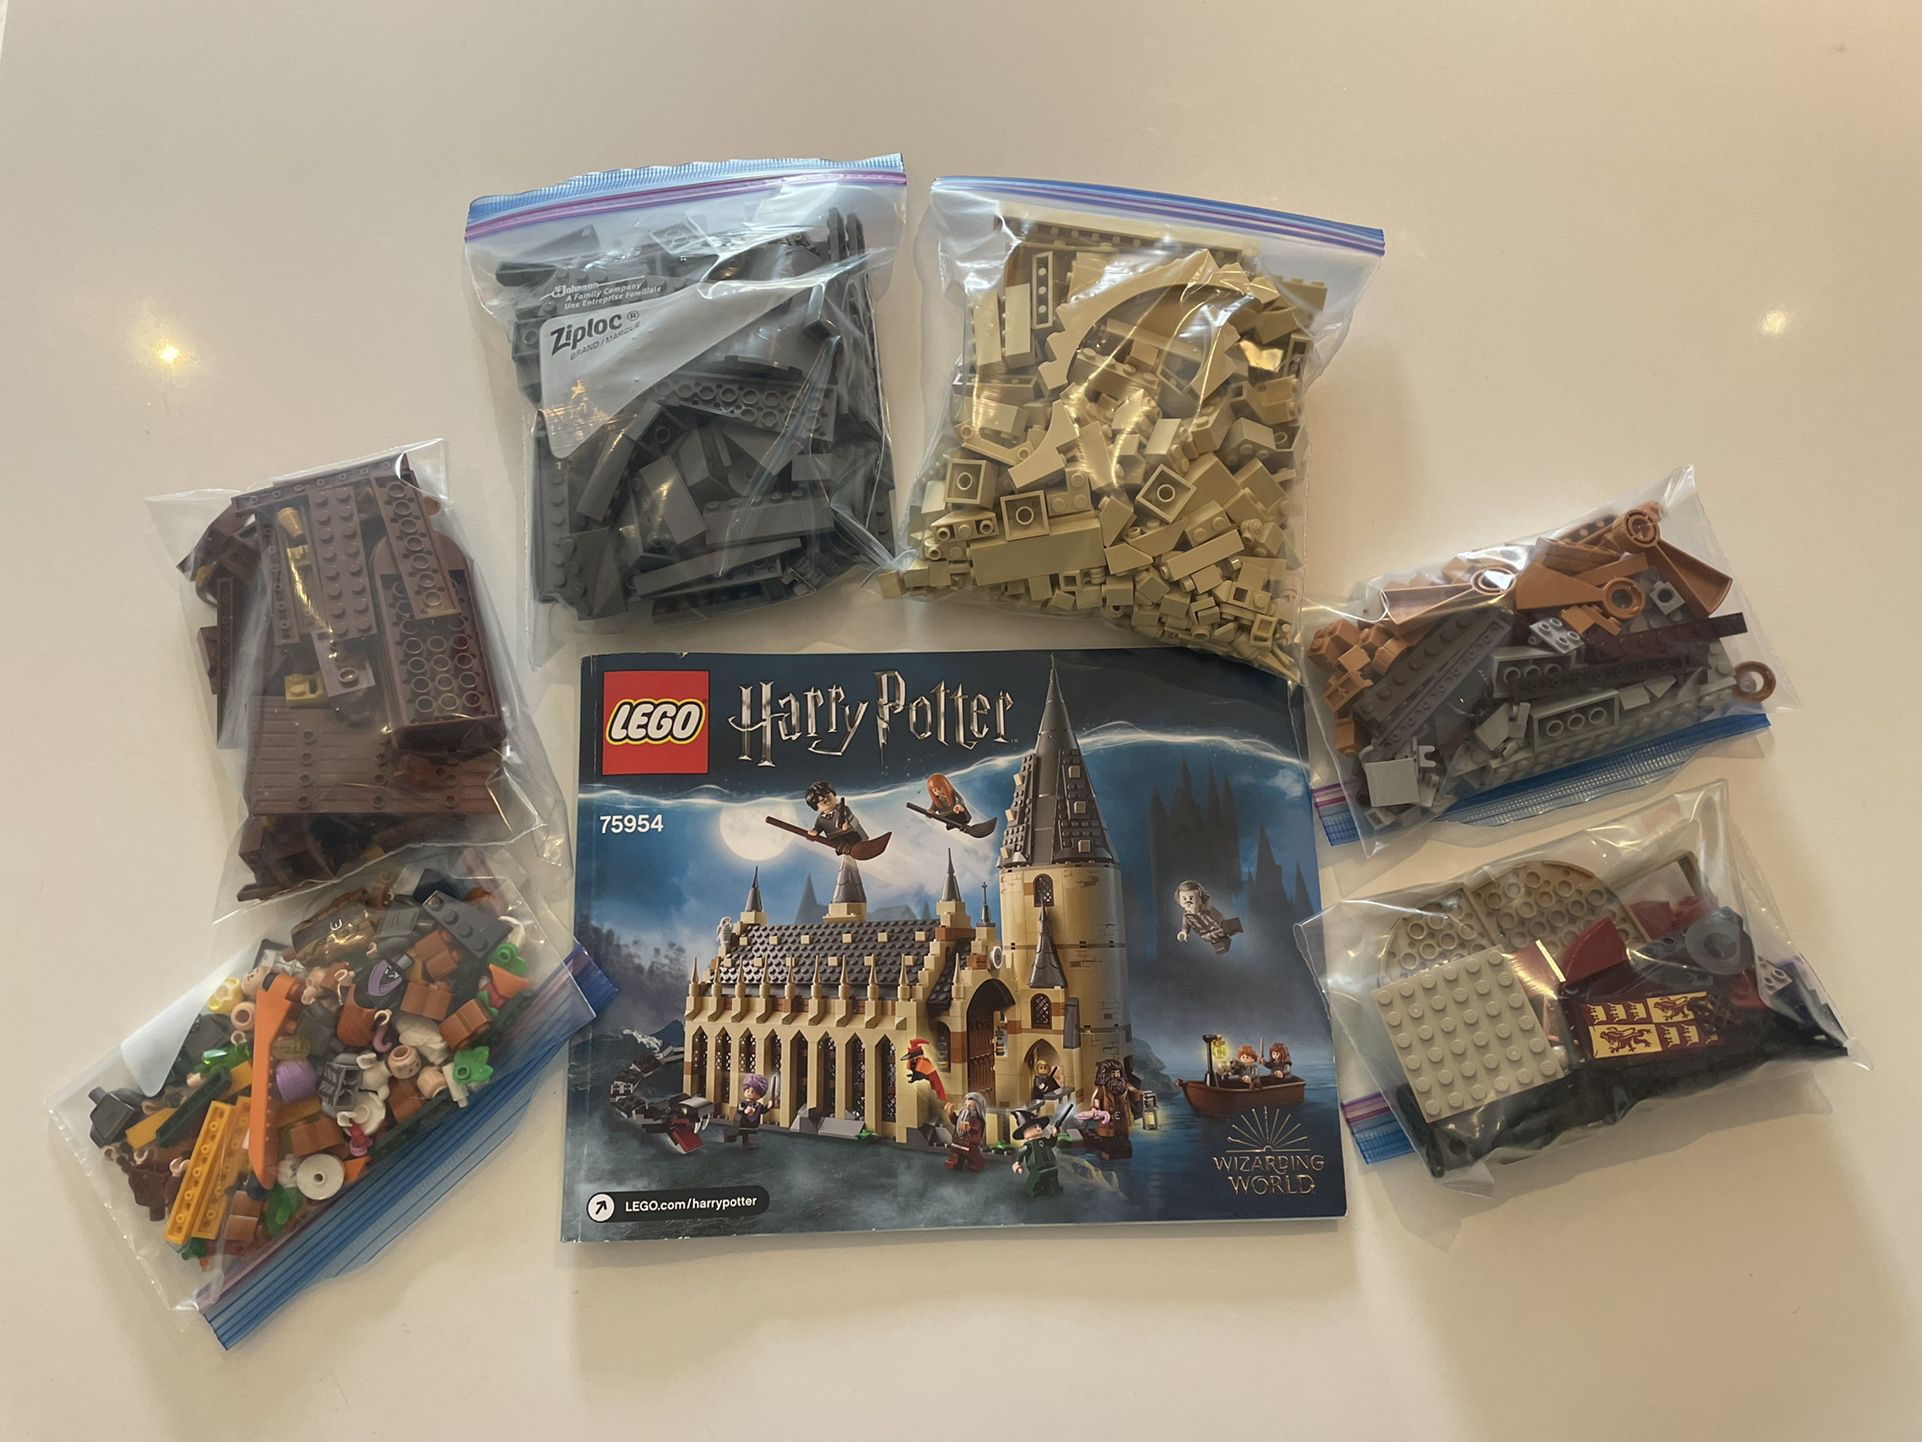 LEGO Harry Potter Hogwarts Great Hall 75954 Building Kit and Magic Castle Toy, Fantasy Creatures, Hermione Granger, Draco Malfoy and Hagrid (878 Piece